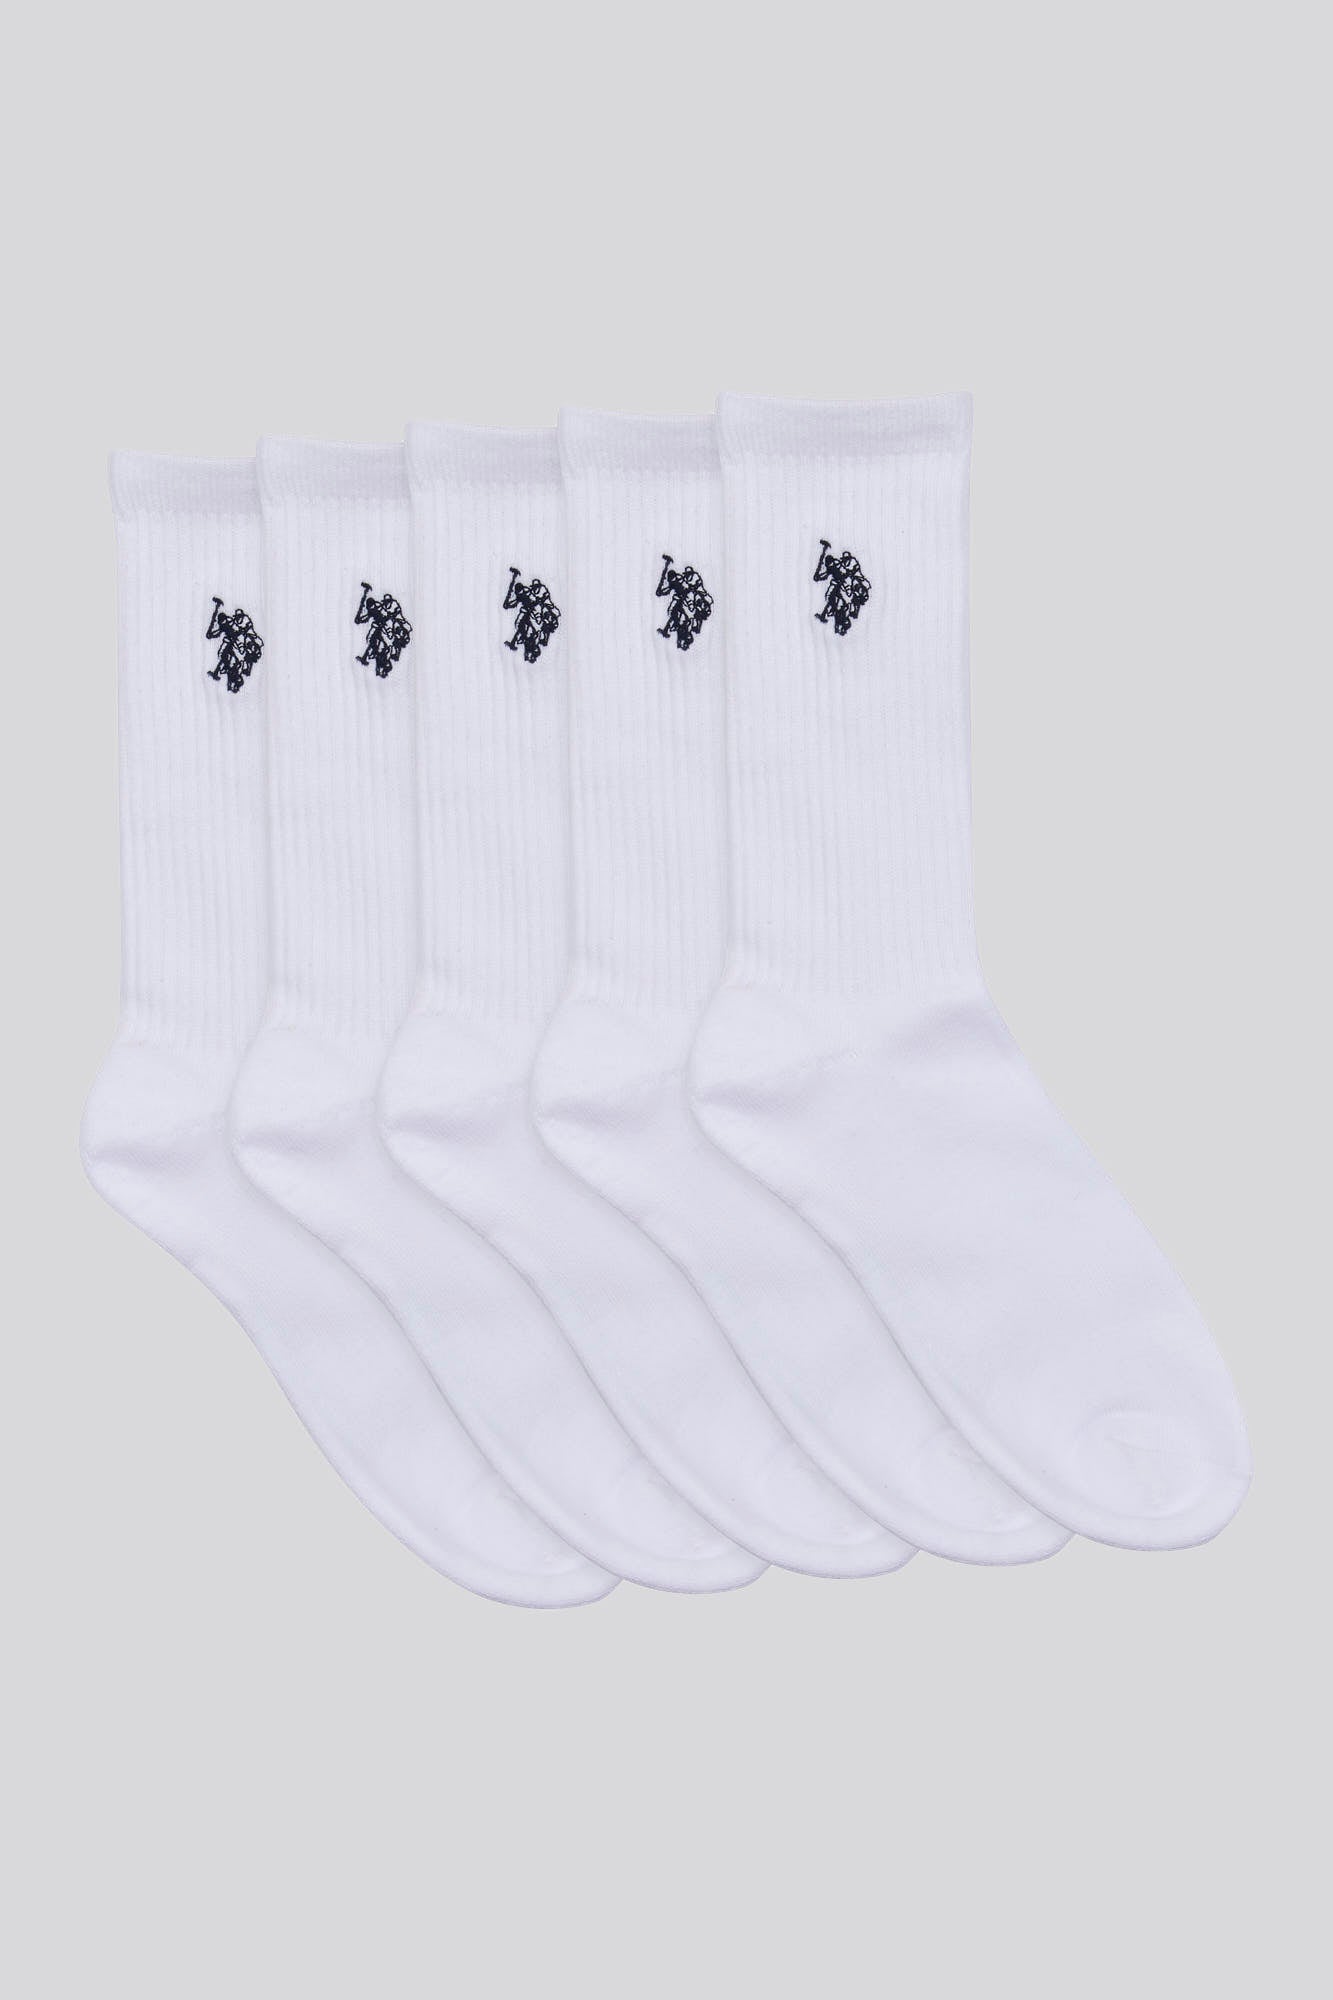 U.S. Polo Assn. Mens Five Pack Classic Sports Socks in Bright White